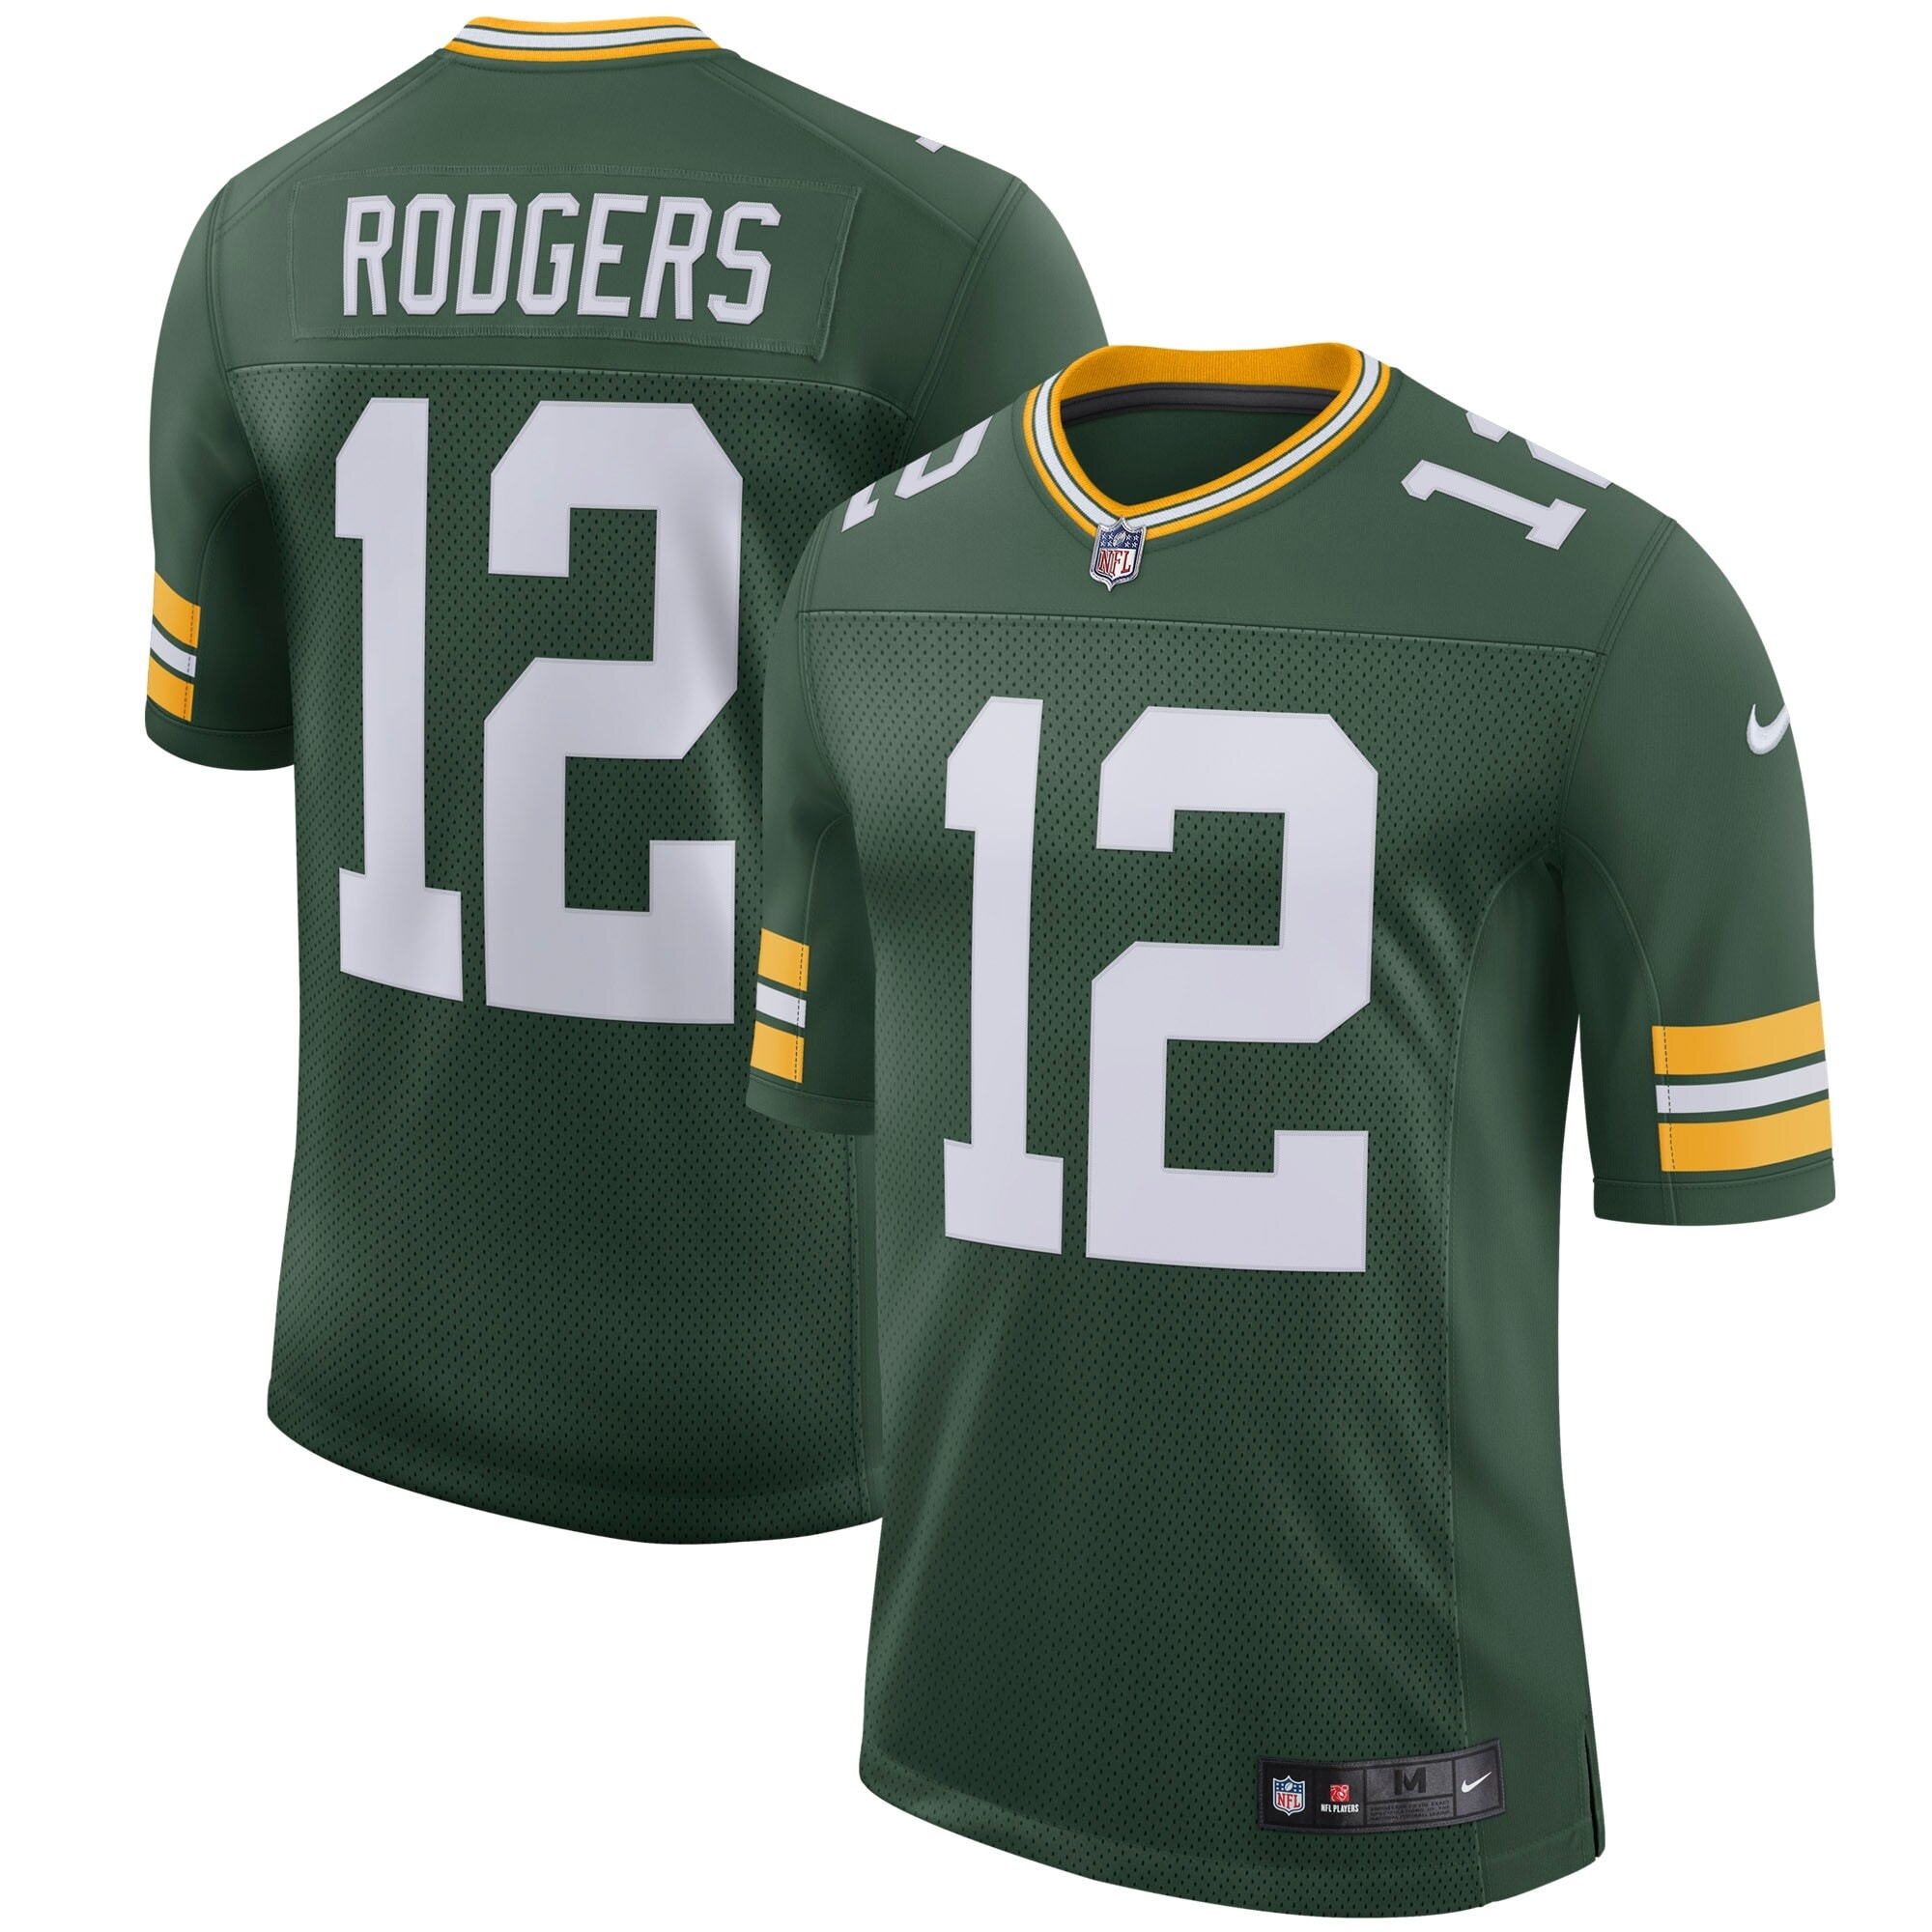 aaron rodgers acme packers jersey